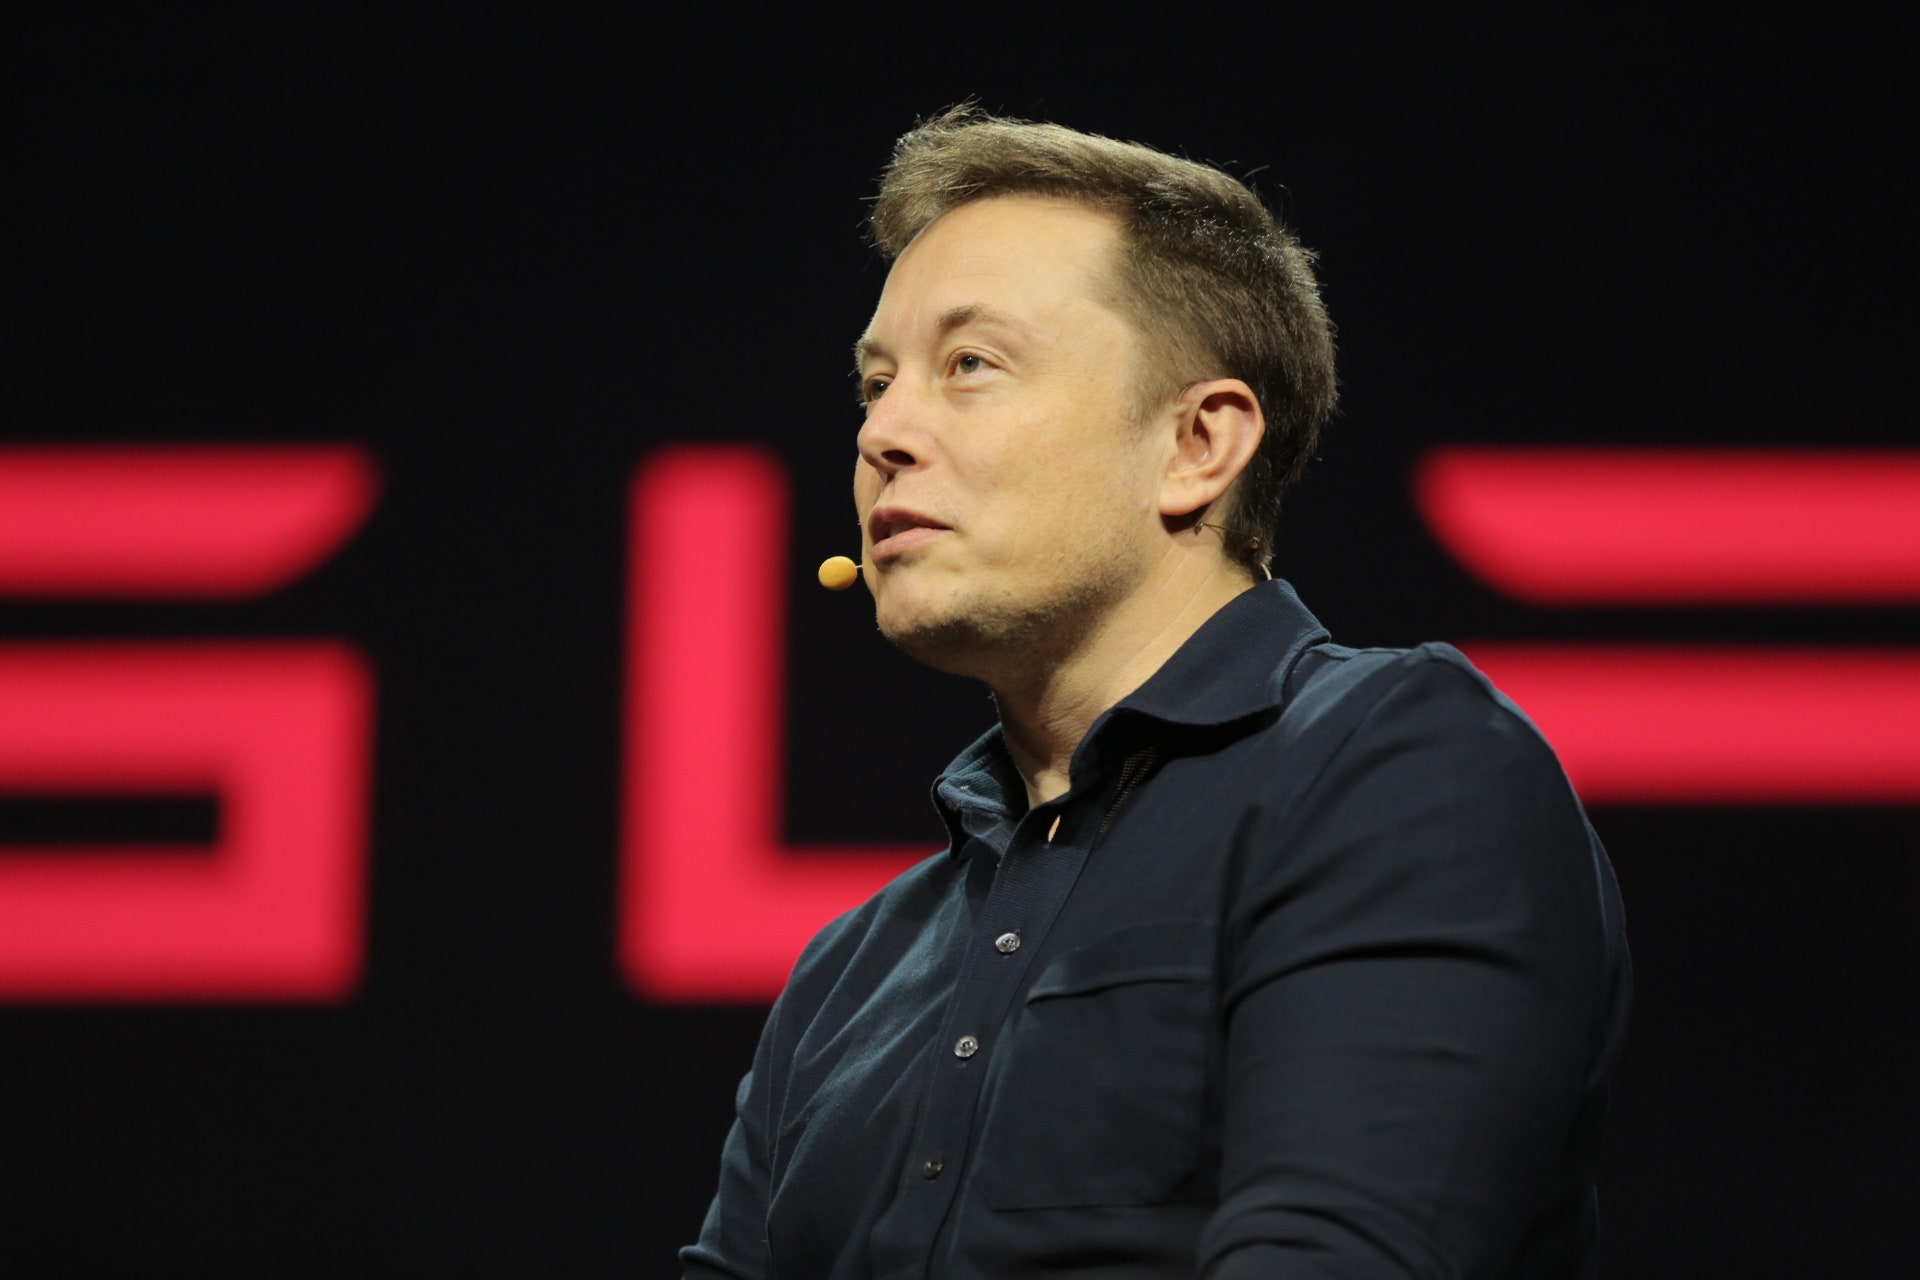 Elon Musk Discloses 9.2% Stake In Twitter Weeks After Criticizing Algorithm: What You Need To Know